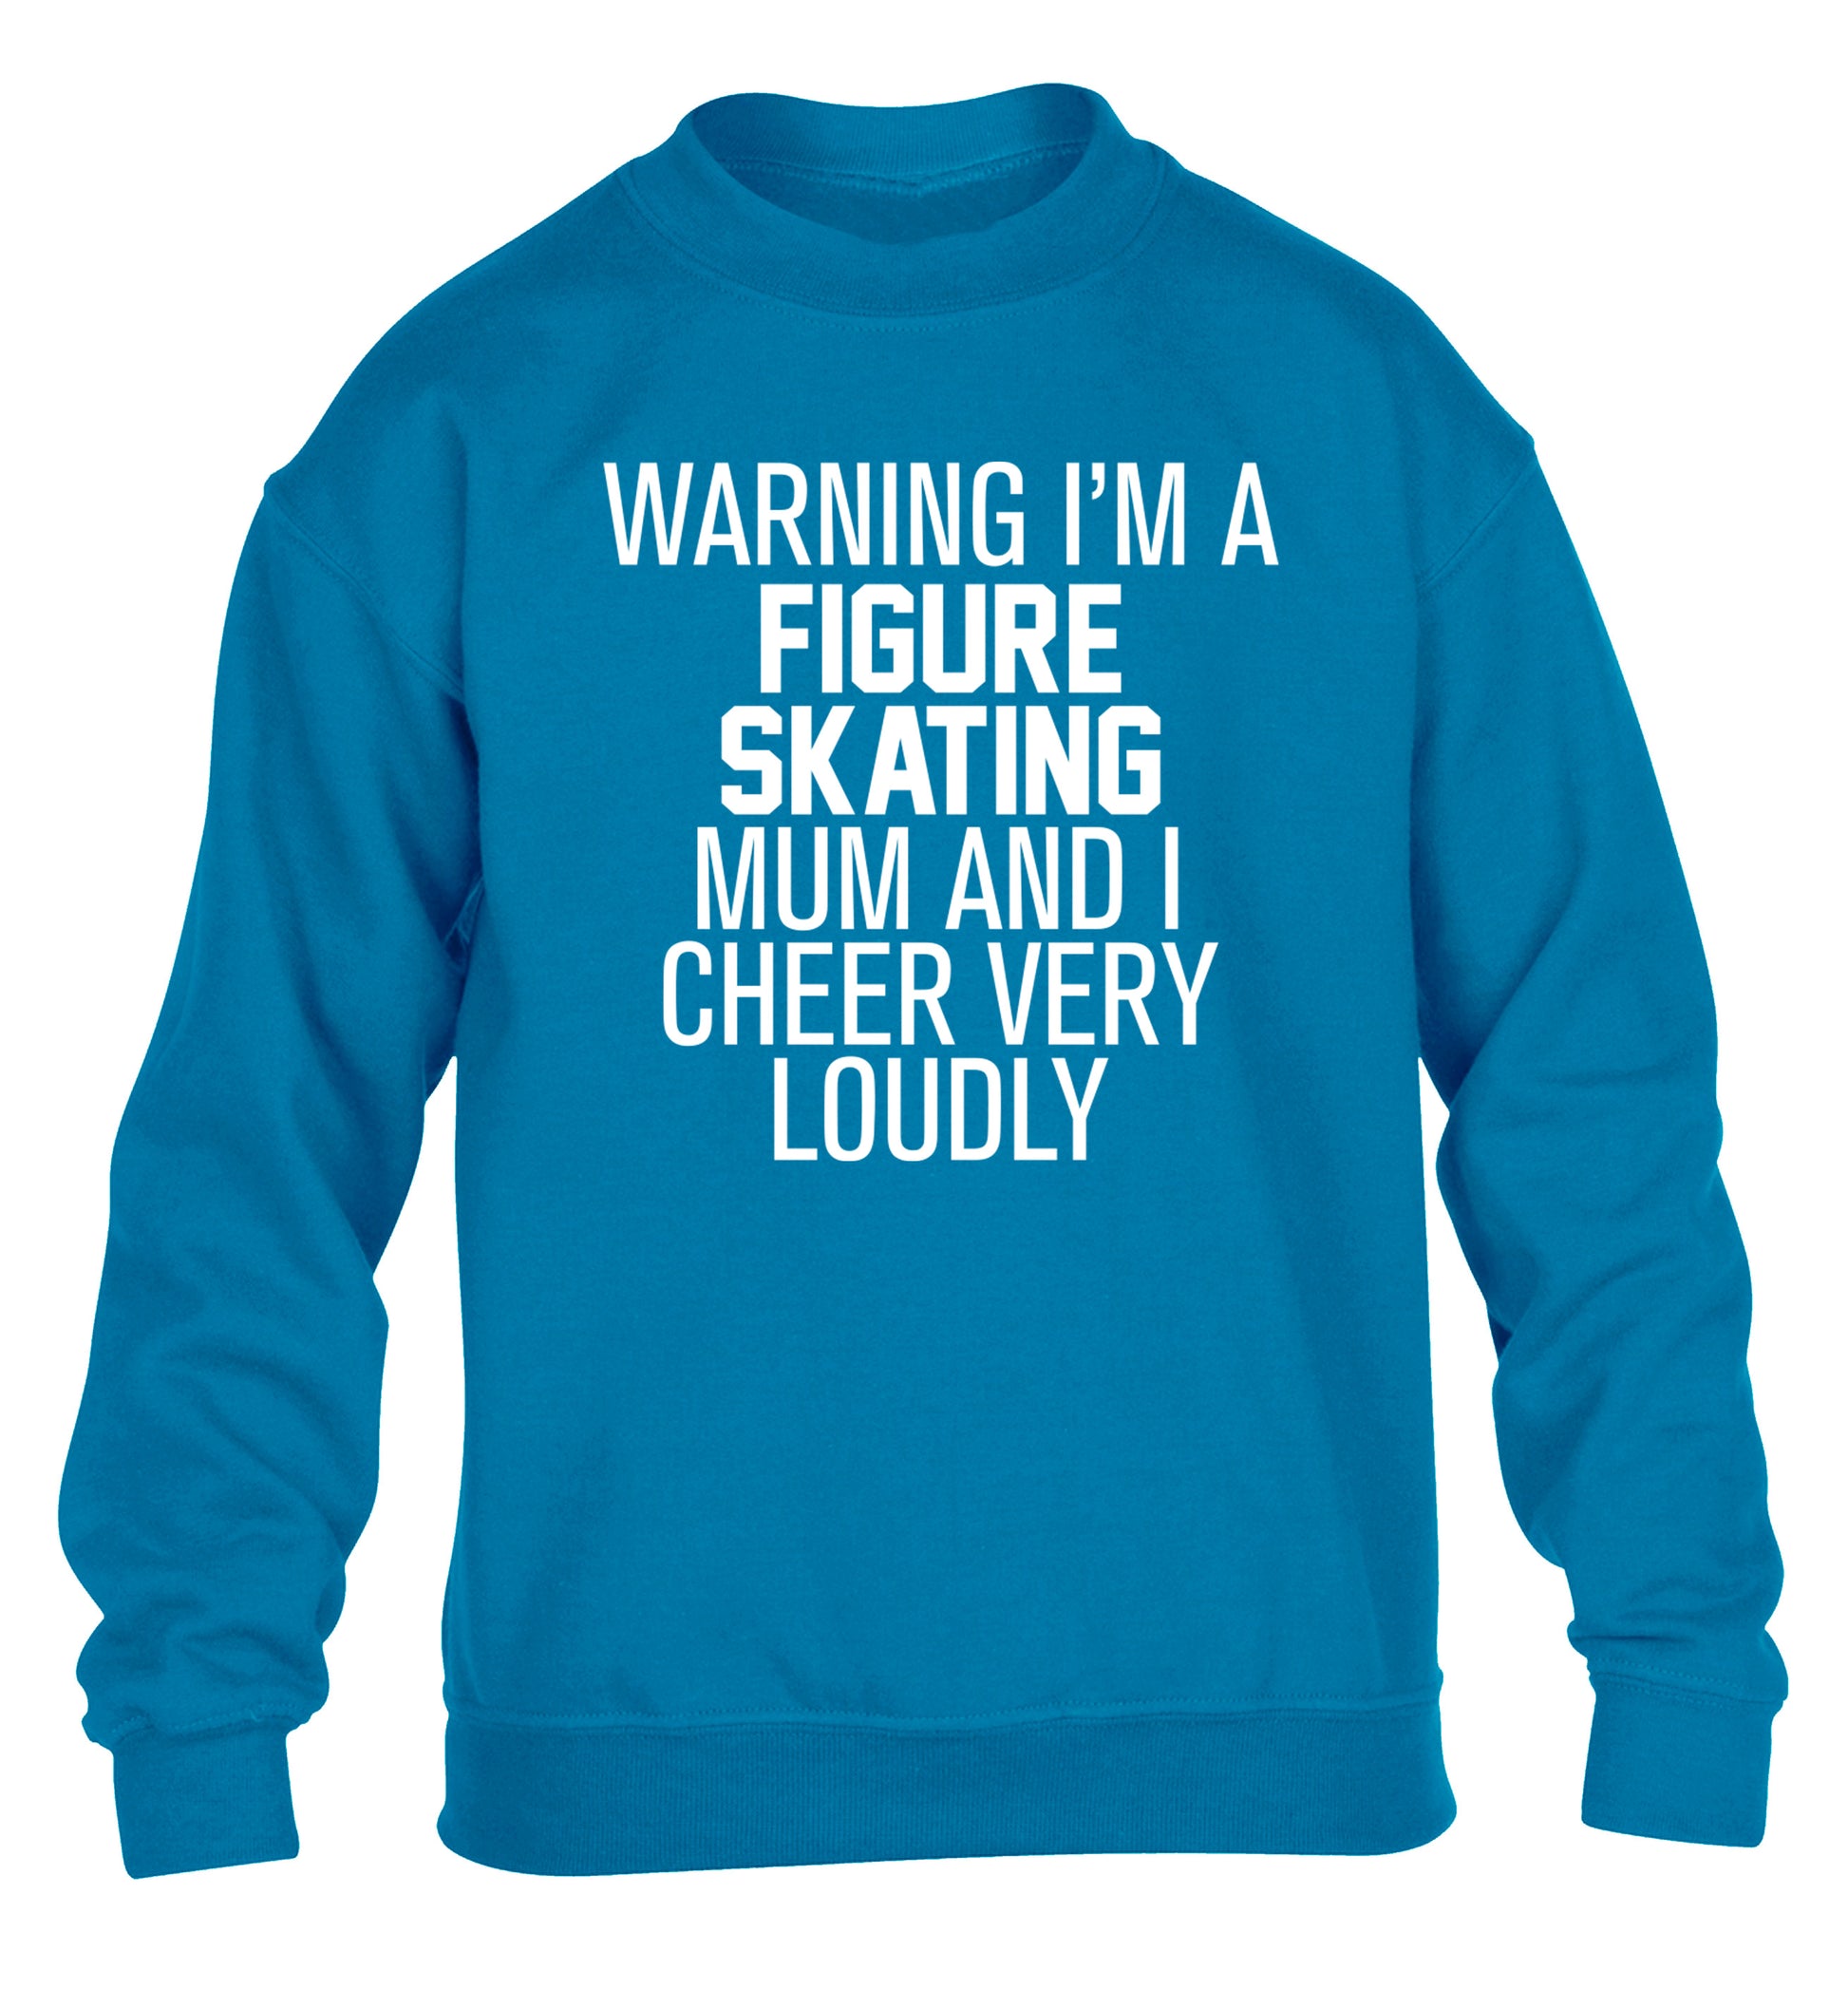 Warning I'm a figure skating mum and I cheer very loudly children's blue sweater 12-14 Years